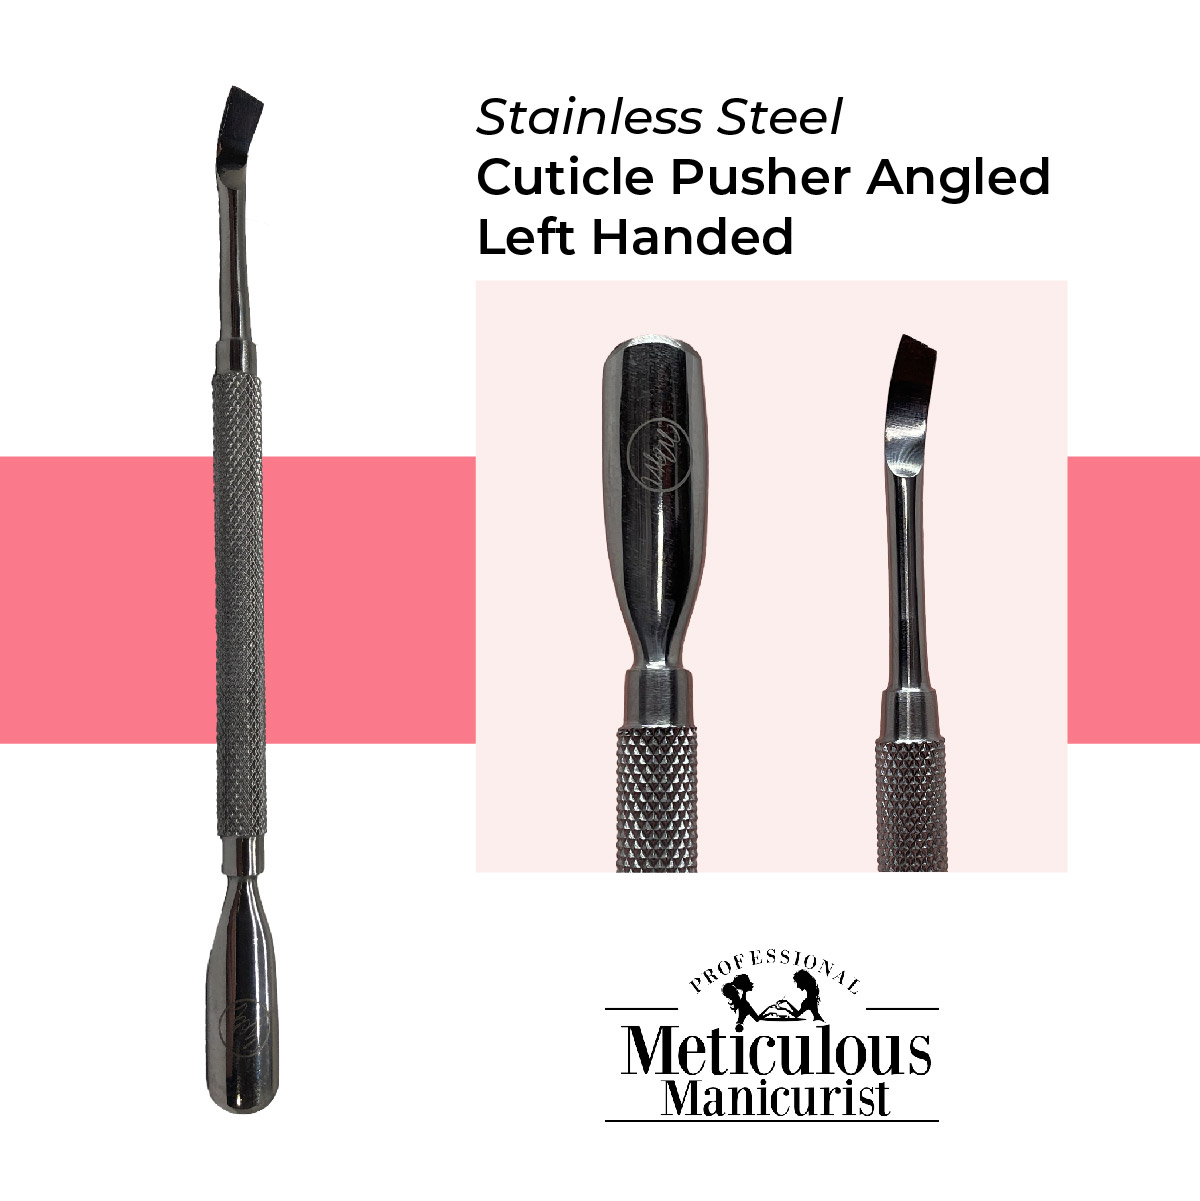 Left Handed Stainless Steel Cuticle Pusher Angled